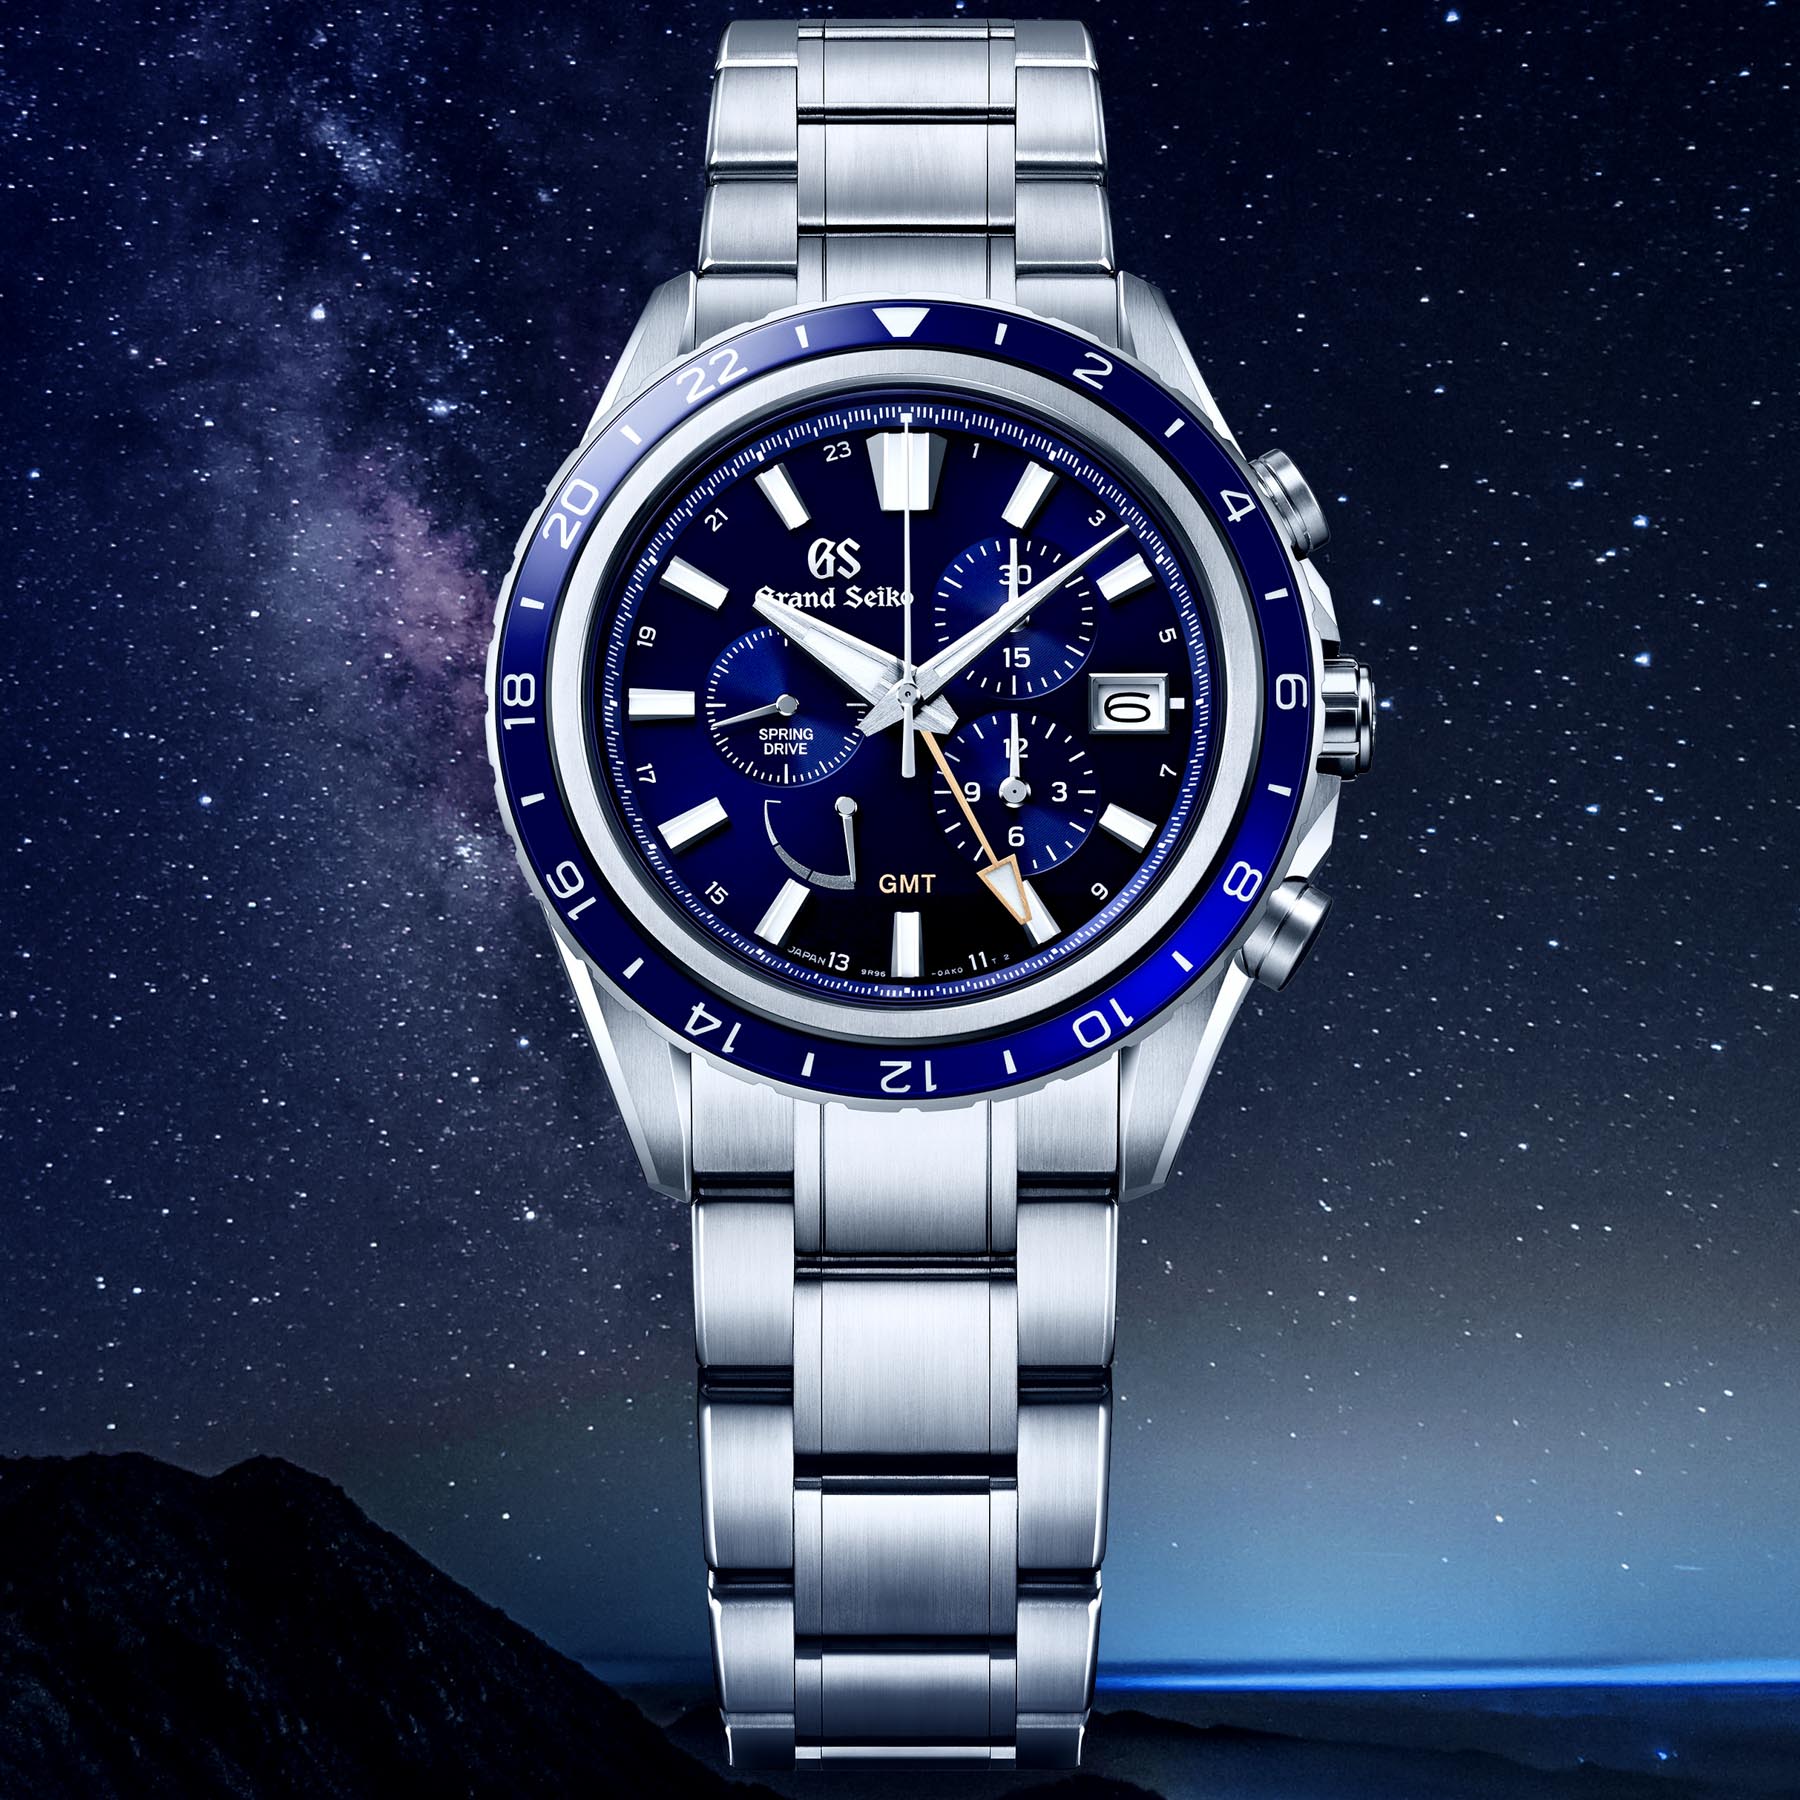 Grand Seiko 3 Sport Watches To Evolution 9 Collection | aBlogtoWatch